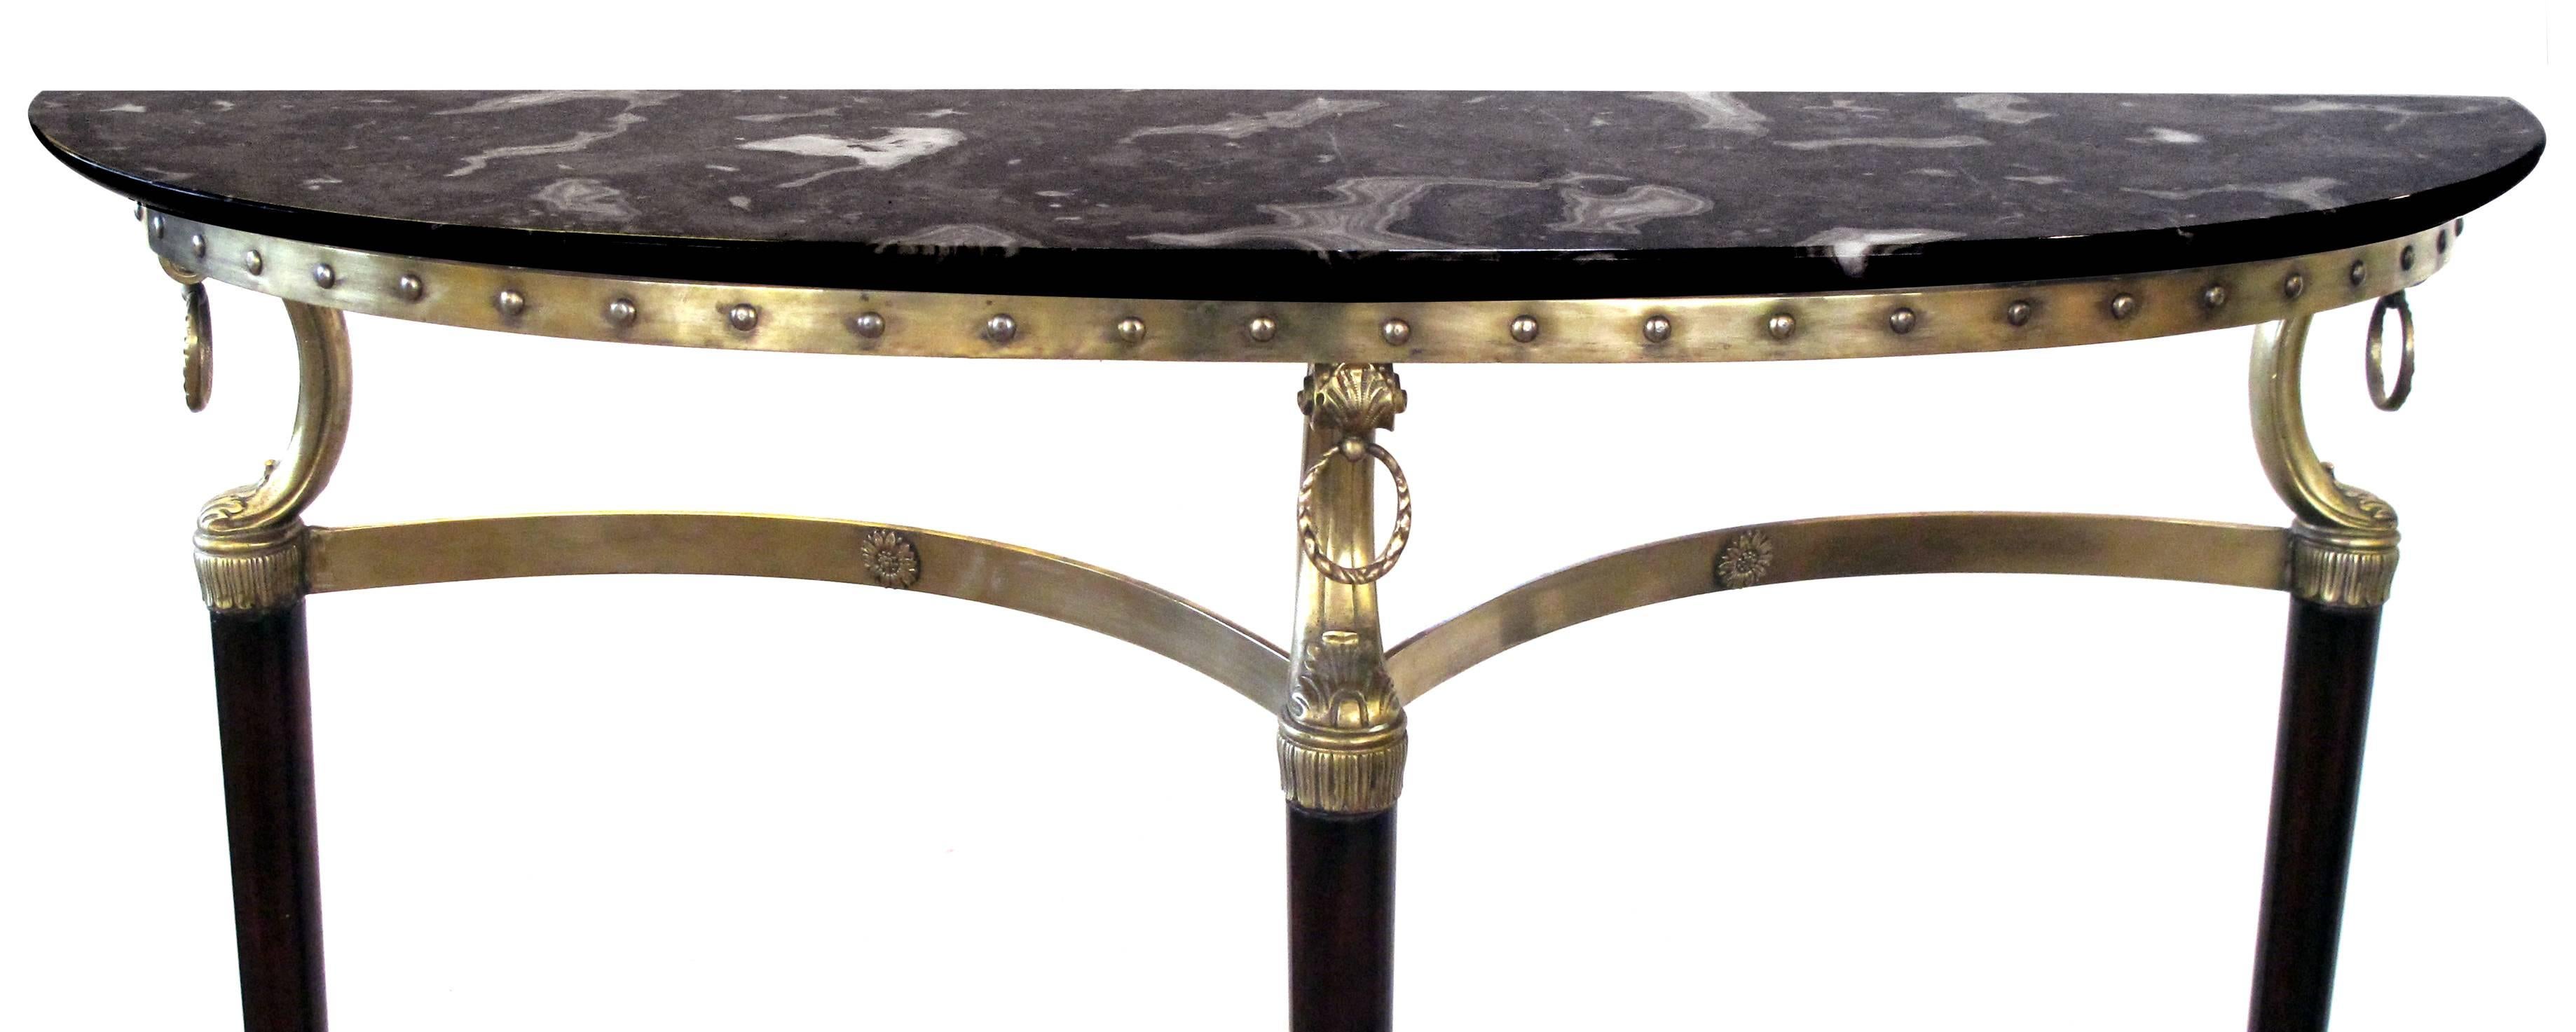 Mid-20th Century Chic Italian Gilt Bronze Demilune Console Table with Matching Shield-Form Mirror